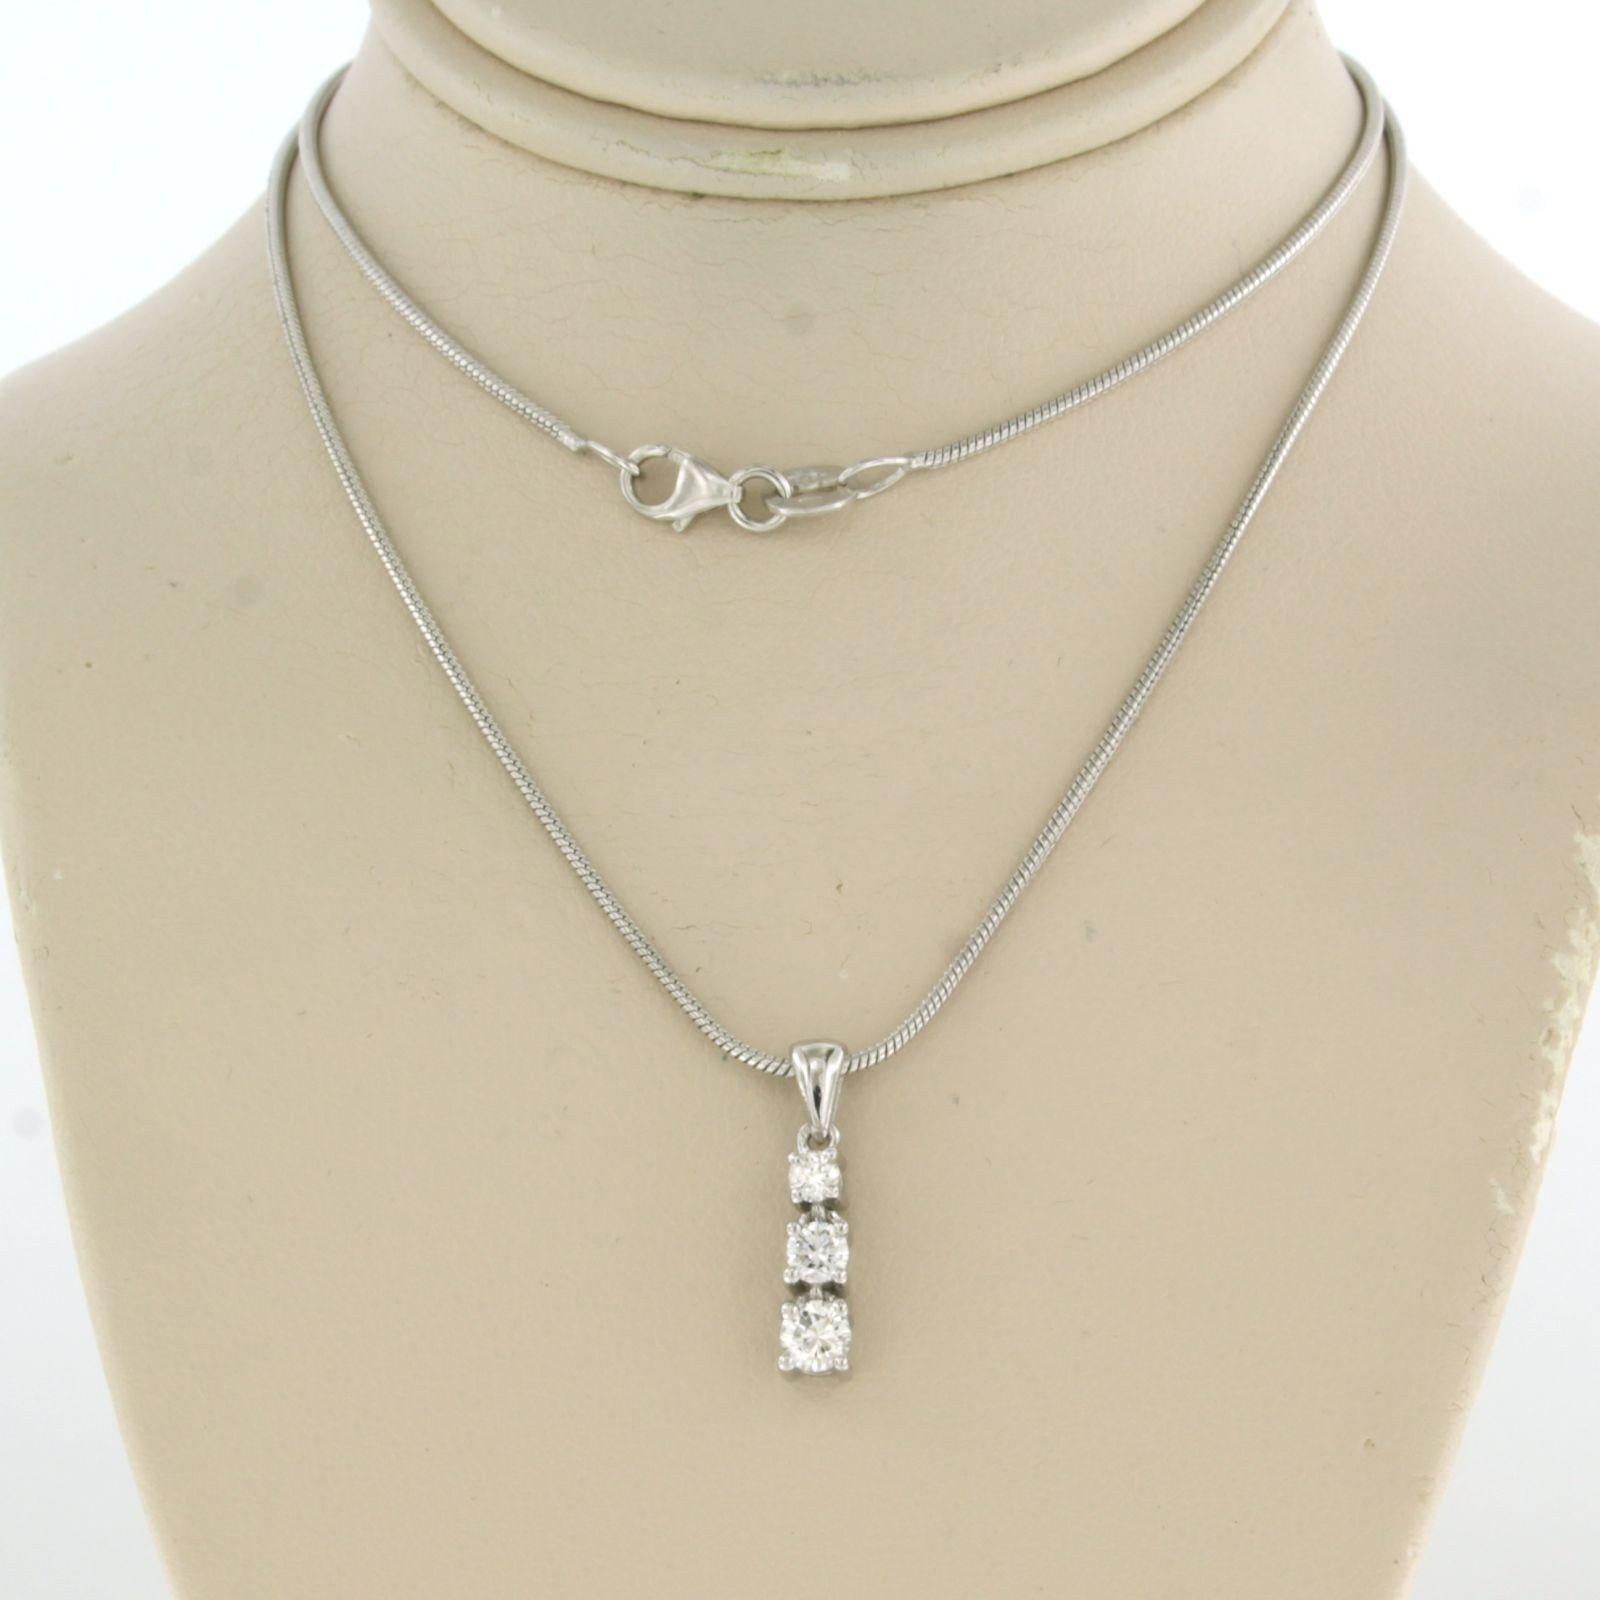 14k white gold necklace with pendant set with brilliant cut diamonds up to. 0.38ct – F/G – VS/SI - 45 cm long

detailed description:

the necklace is 45 cm long and 1.1 mm wide

the pendant is 1.8 cm long by 3.8 mm wide

weight 5.5 grams

occupied